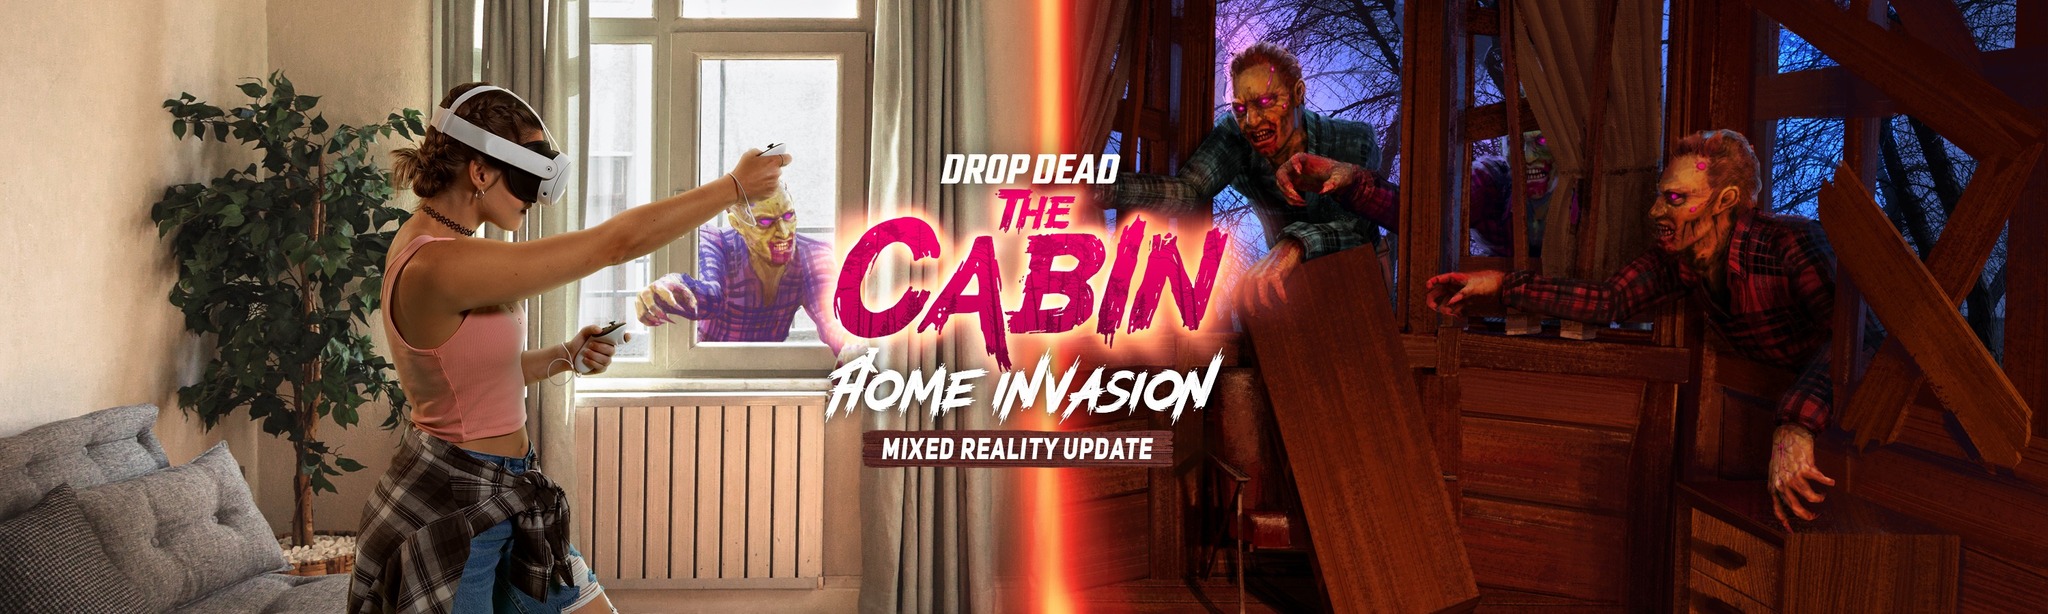 Drop Dead: The Cabin - THE VR GRID